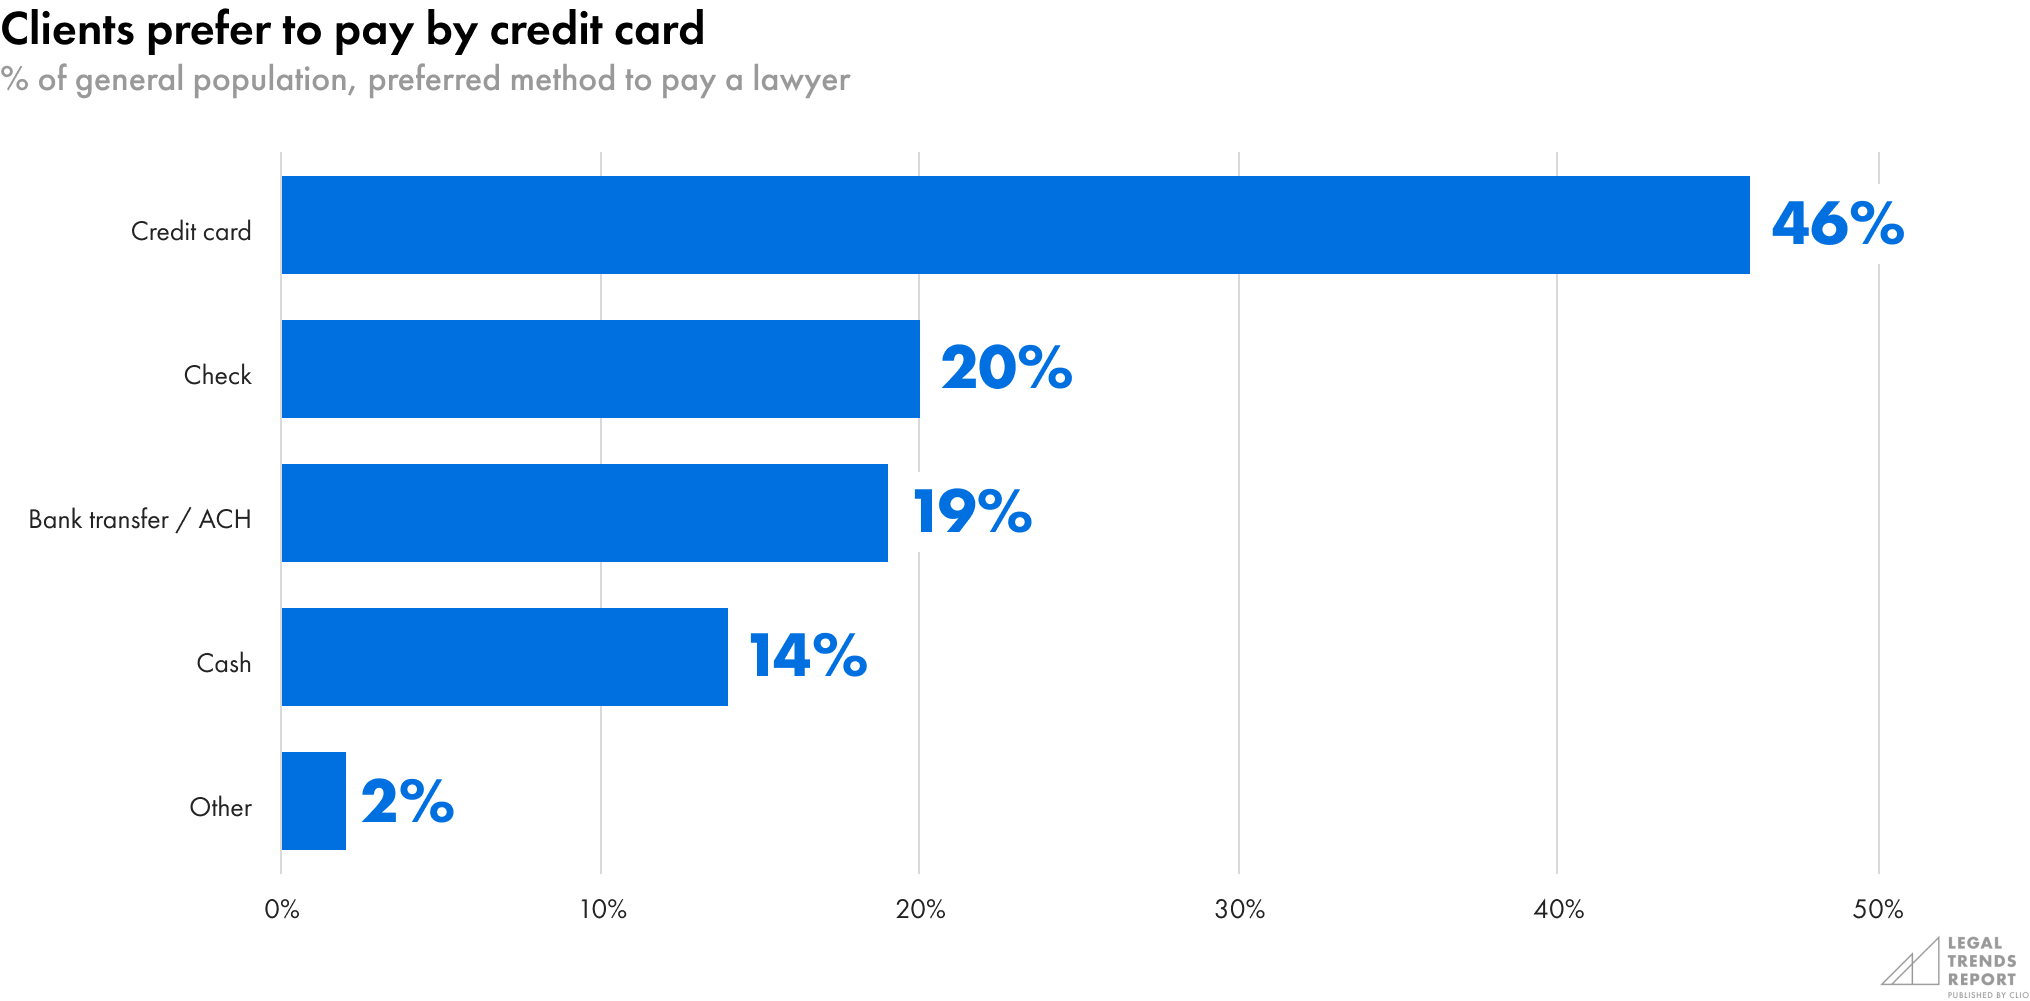 Clients prefer to pay by credit card